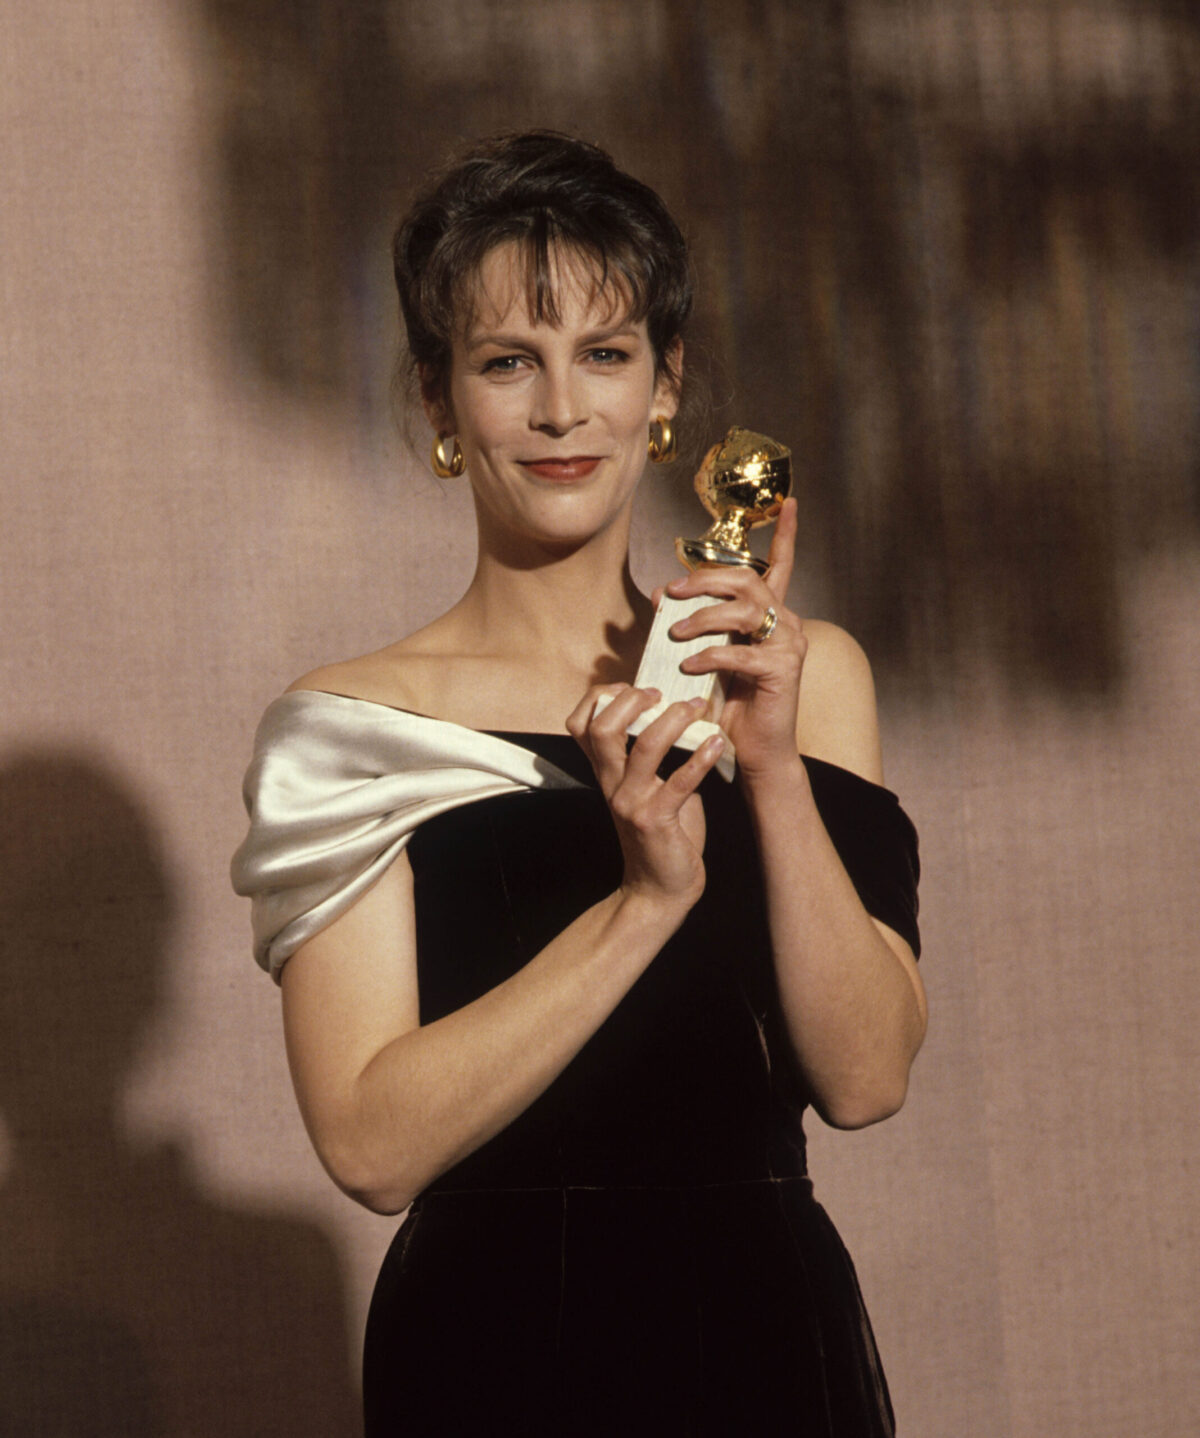 Jamie Lee Curtis, wearing a black and gold dress, holds up her trophy with a smile on her face.